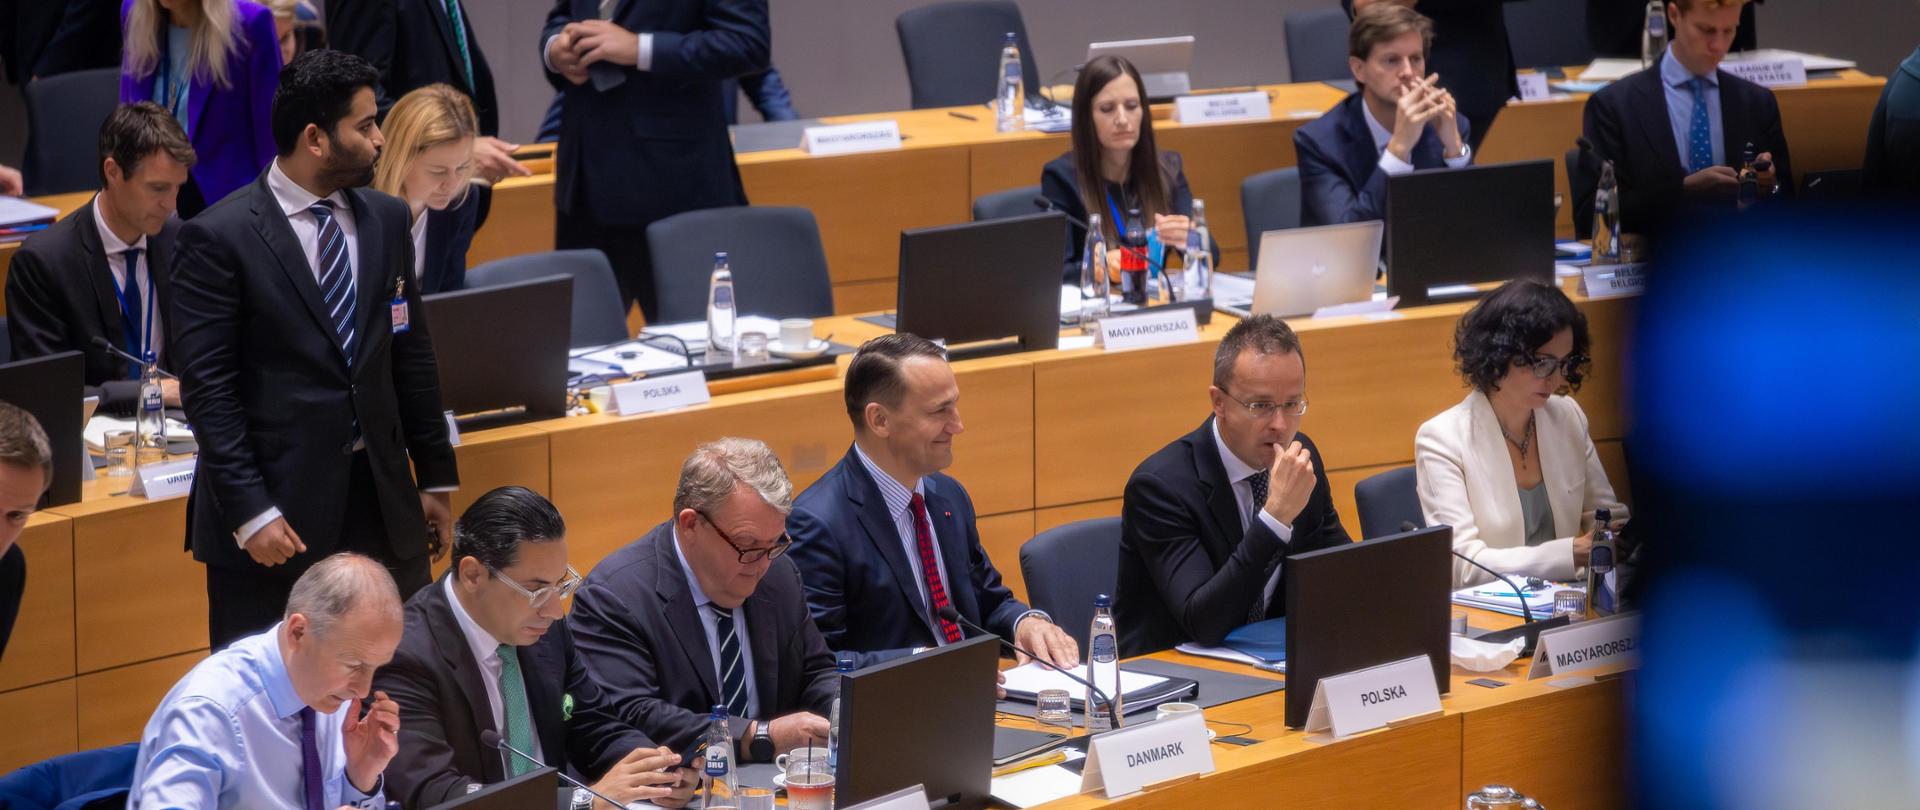 Minister Radosław Sikorski takes part in Foreign Affairs Council session in Brussels